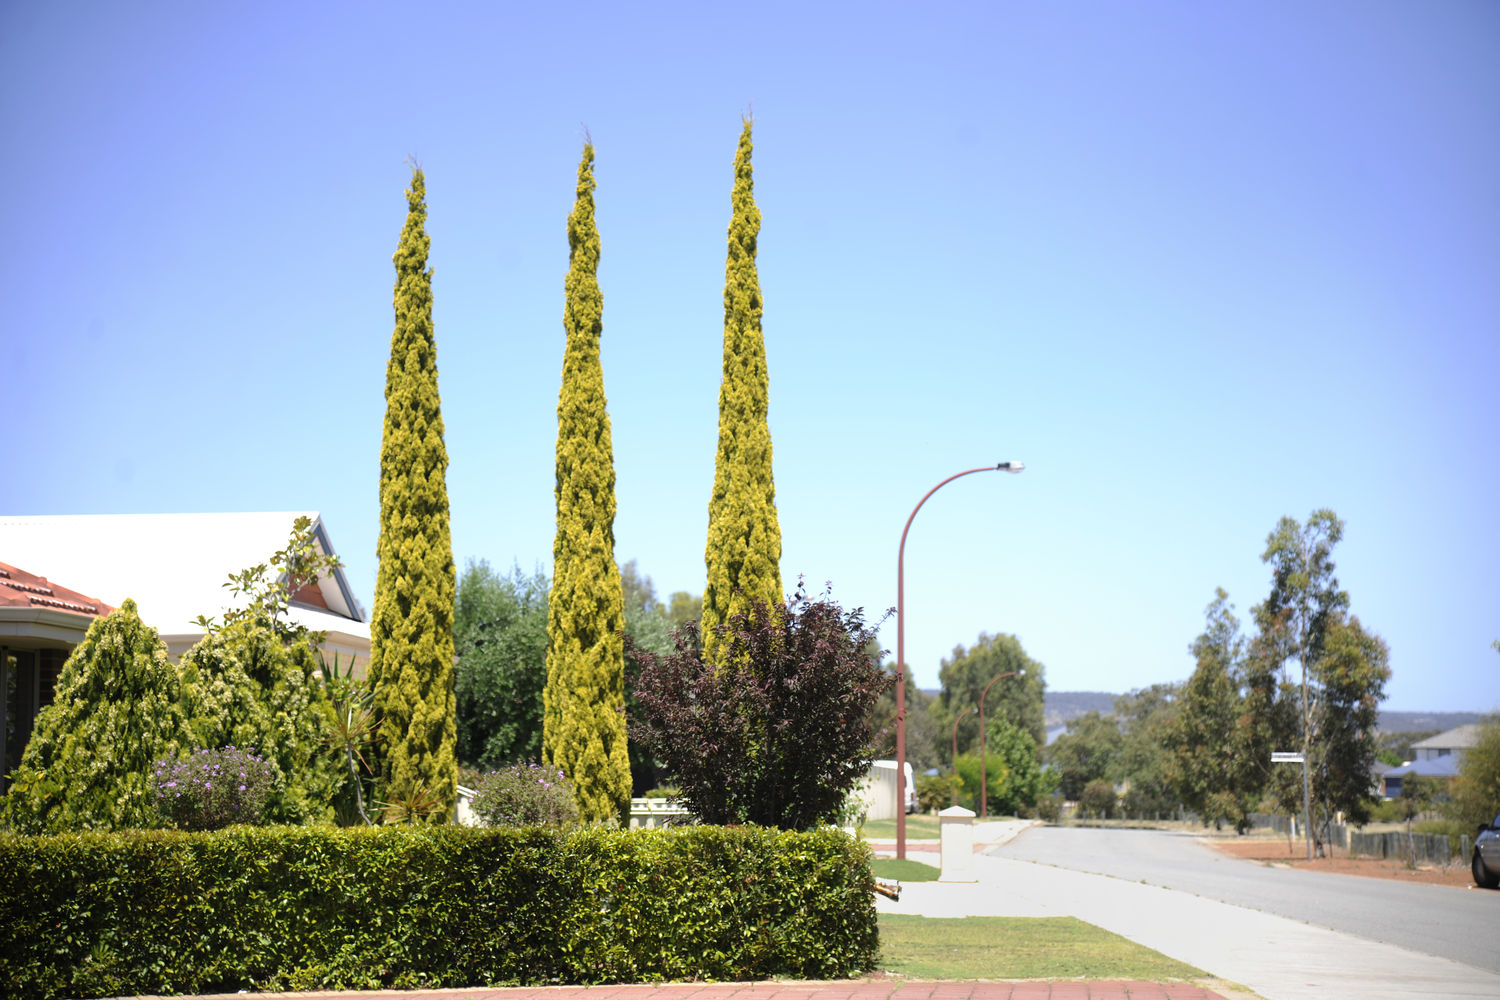 View of a residential street in Wattle Grove showing the verge, street light and road.